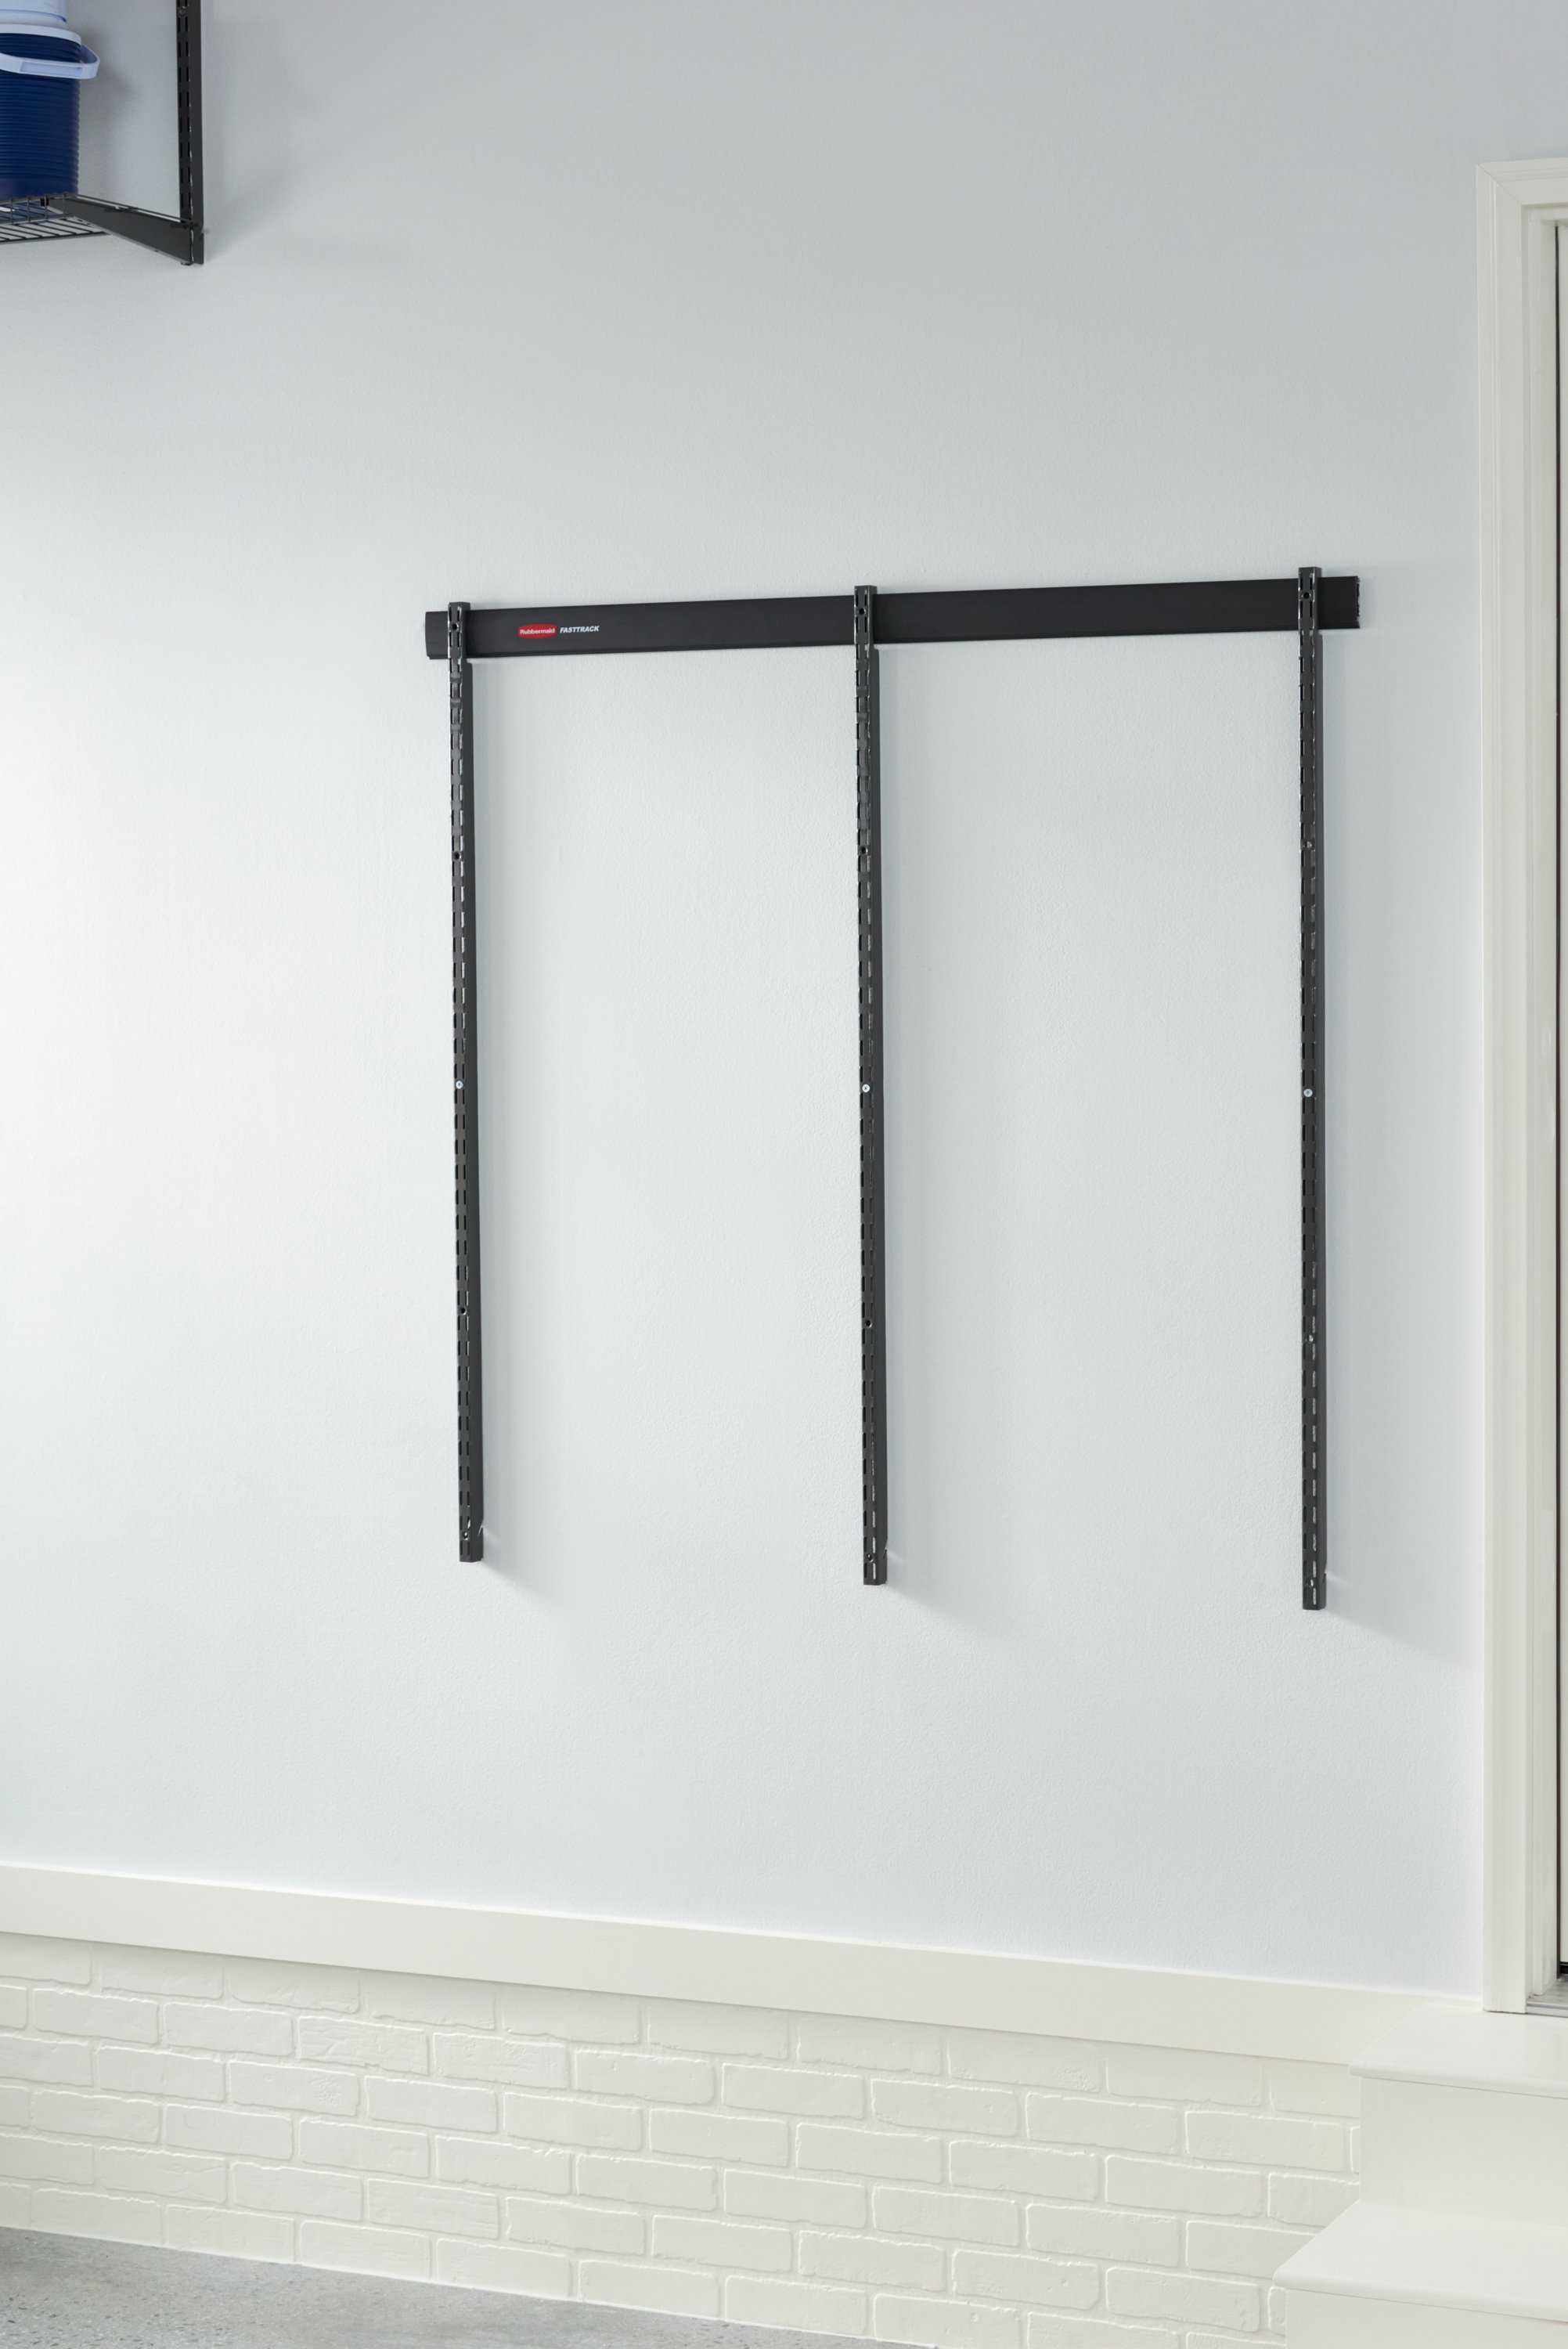 Rubbermaid Heavy Duty Universal Vertical FastTrack Hanging Wall